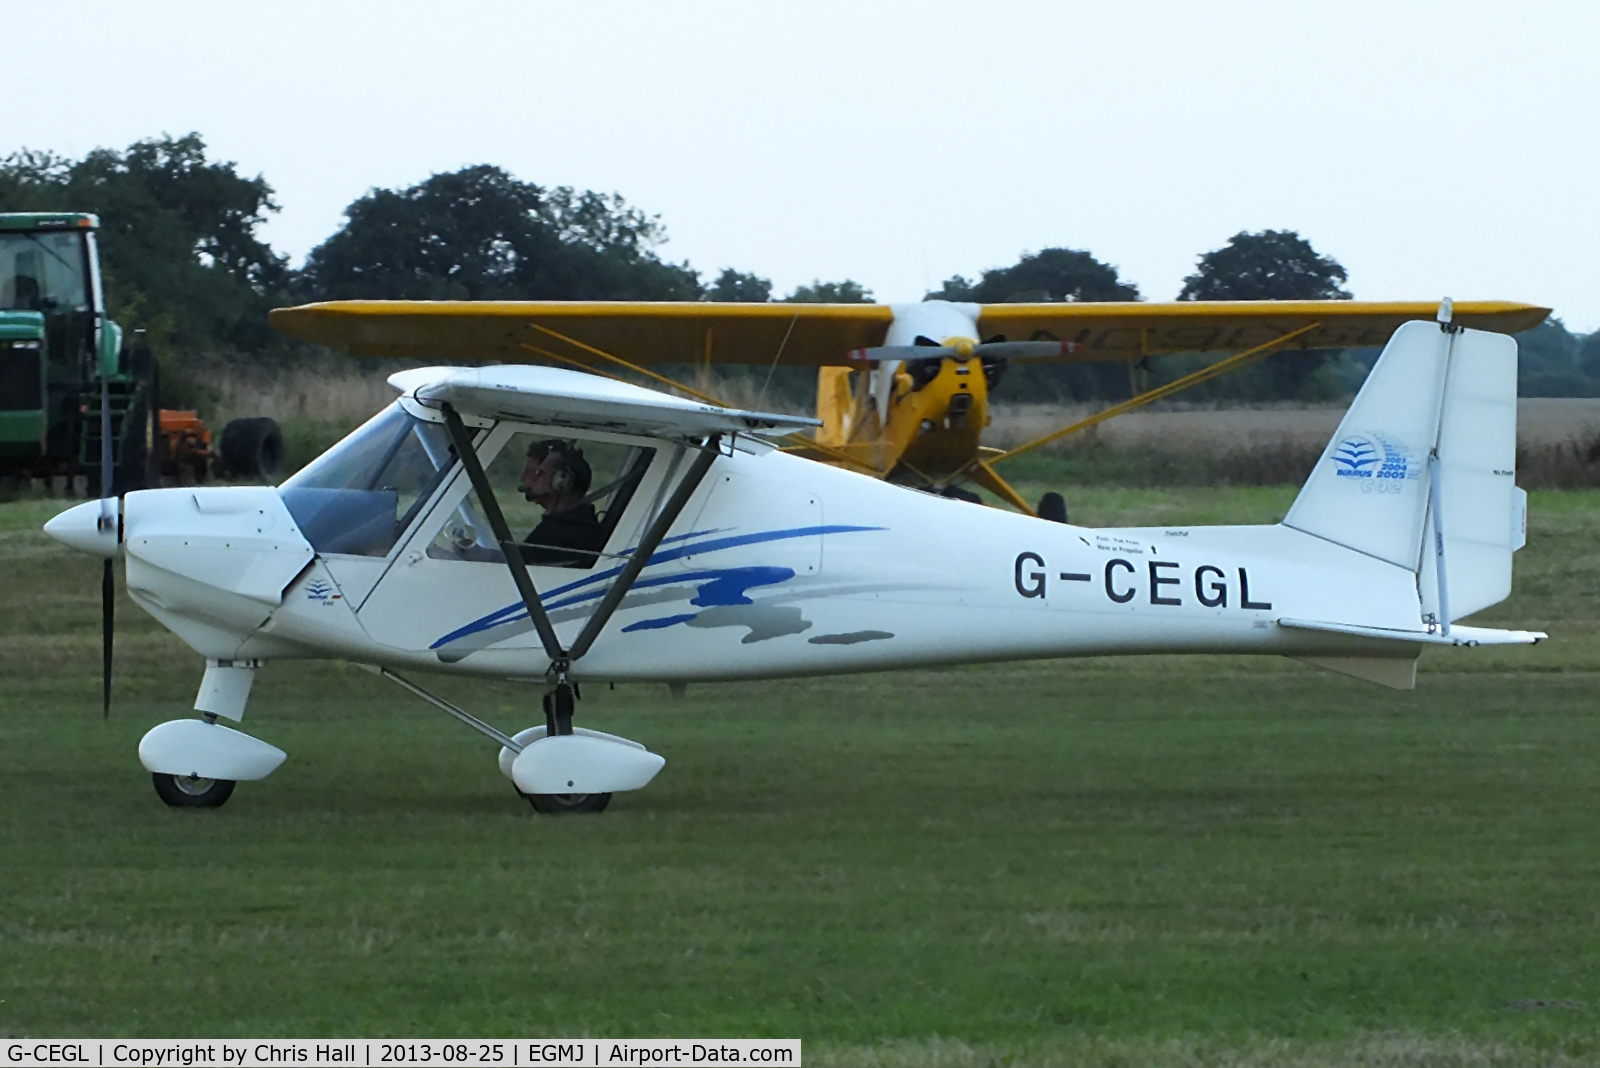 G-CEGL, 2006 Comco Ikarus C42 FB80 C/N 0609-6848, at the Little Gransden Air & Vintage Vehicle Show